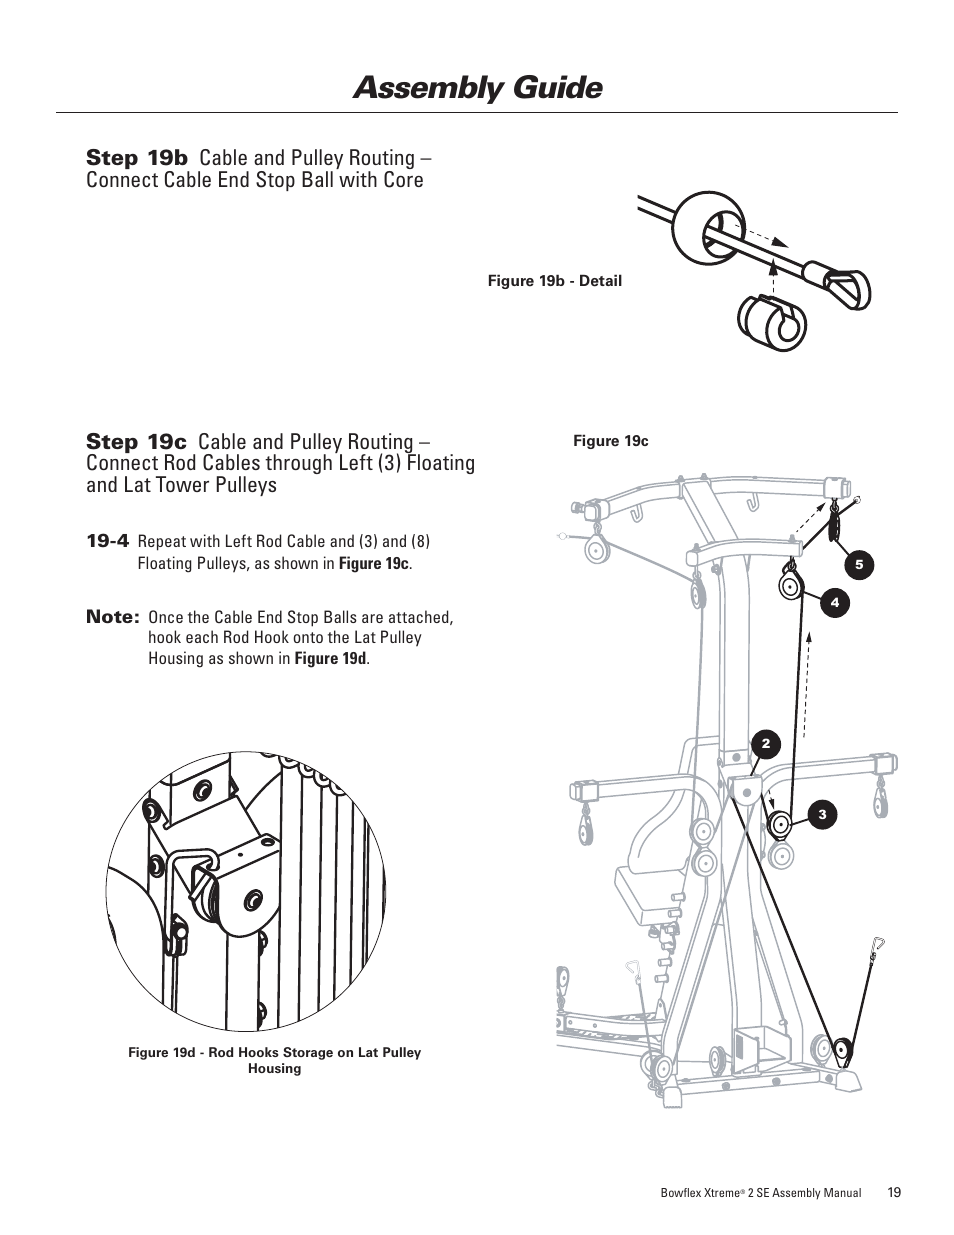 Assembly guide | Bowflex Xtreme 2 SE User Manual | Page 23 / 28